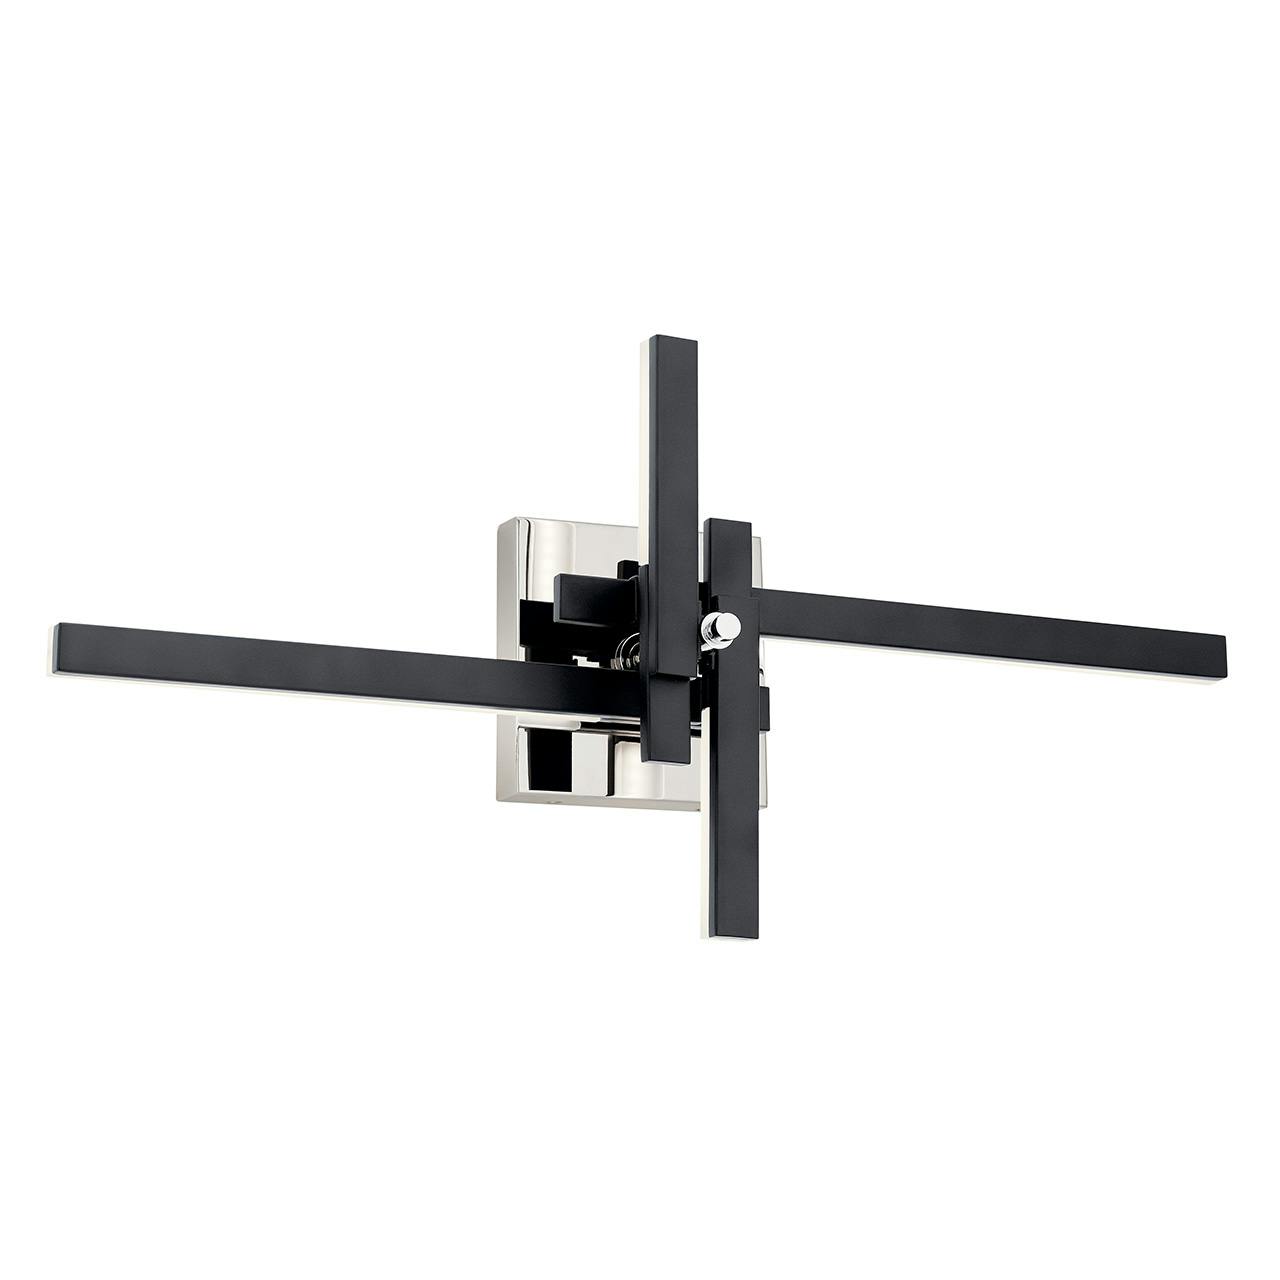 Product image of the 84115MBK shown hung horizontally